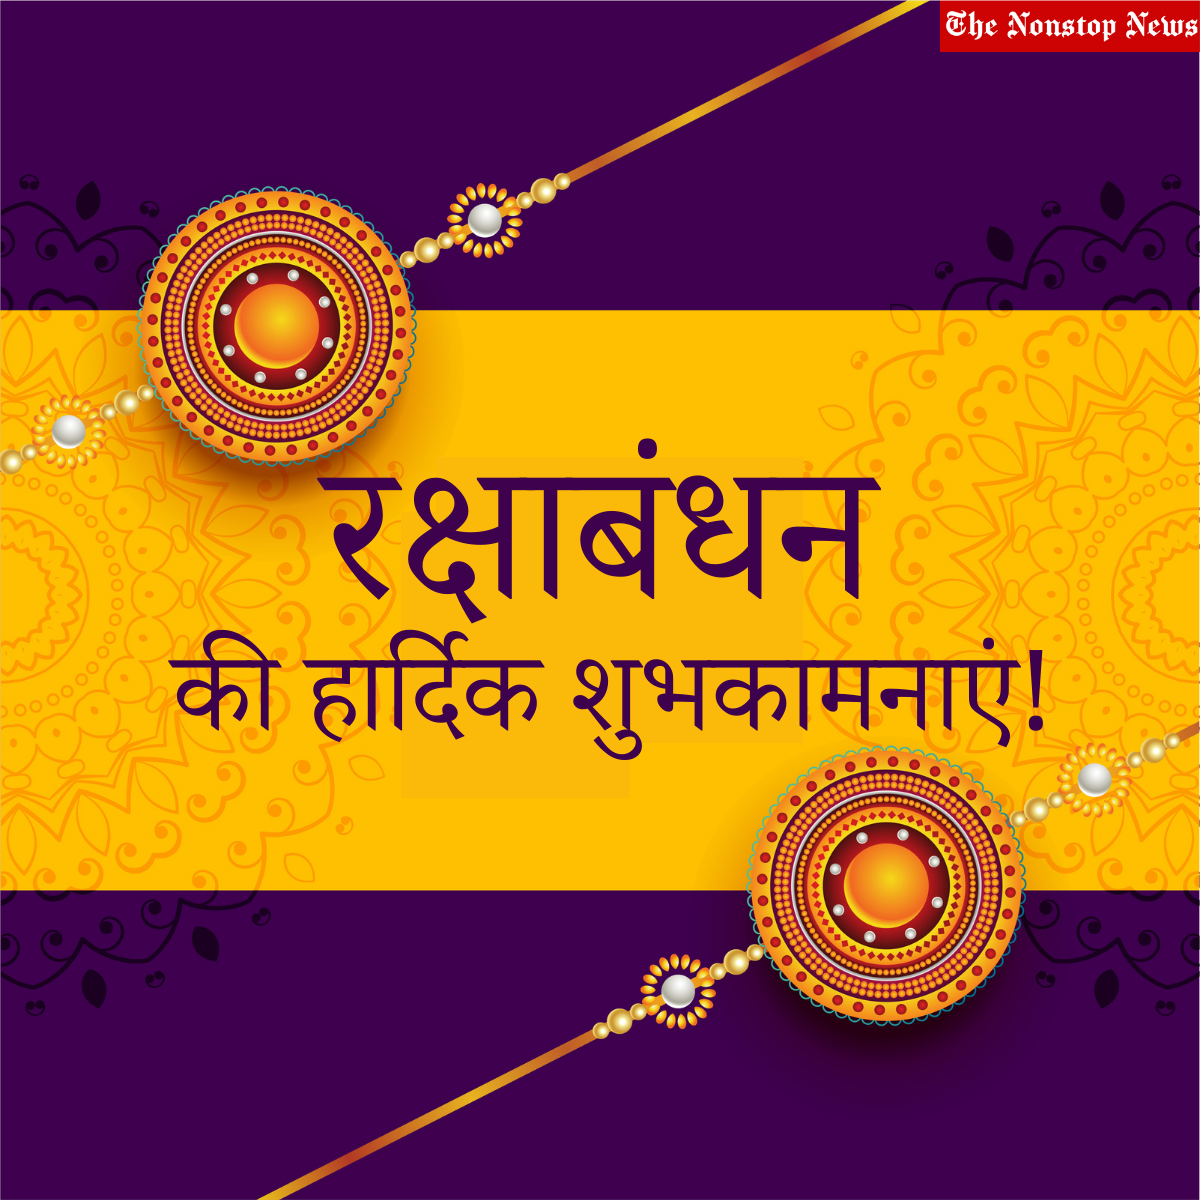 Raksha Bandhan 2022 Wishes in Hindi: Messages, Quotes, Greetings, HD Images, Shayari, Posters, Shubhkaamnayenn to share with your loved ones